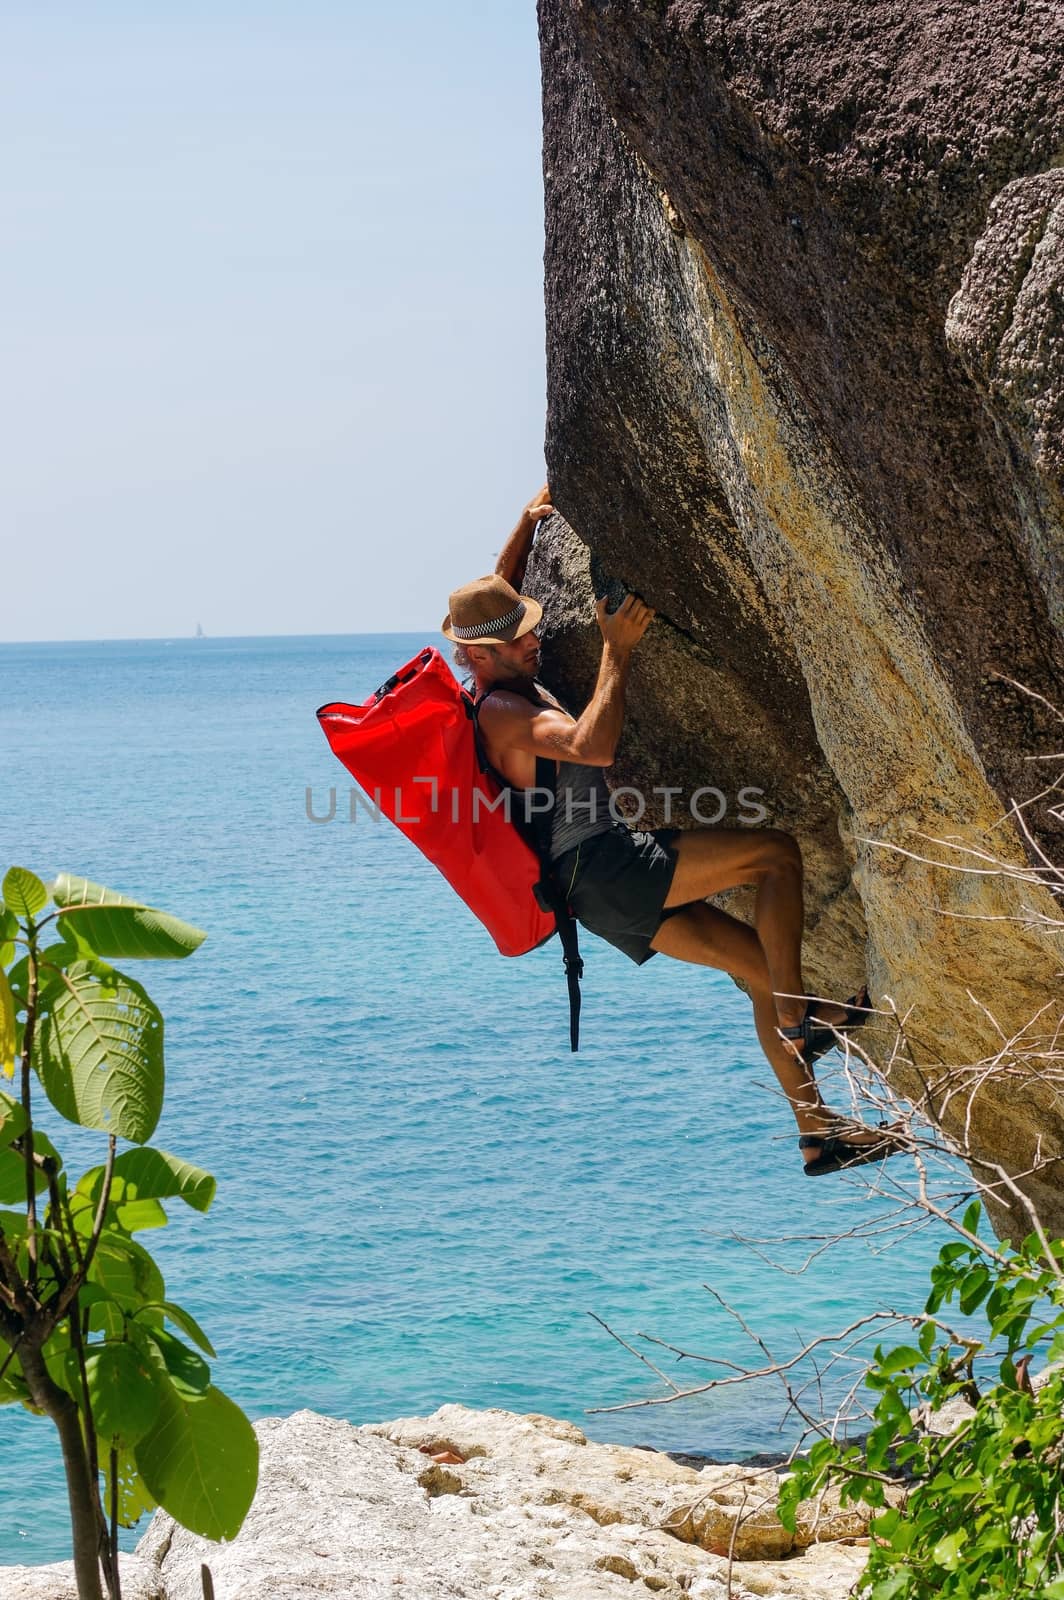 a strong and happy man climbing on high rock over the sea with a hut and a red seabag.